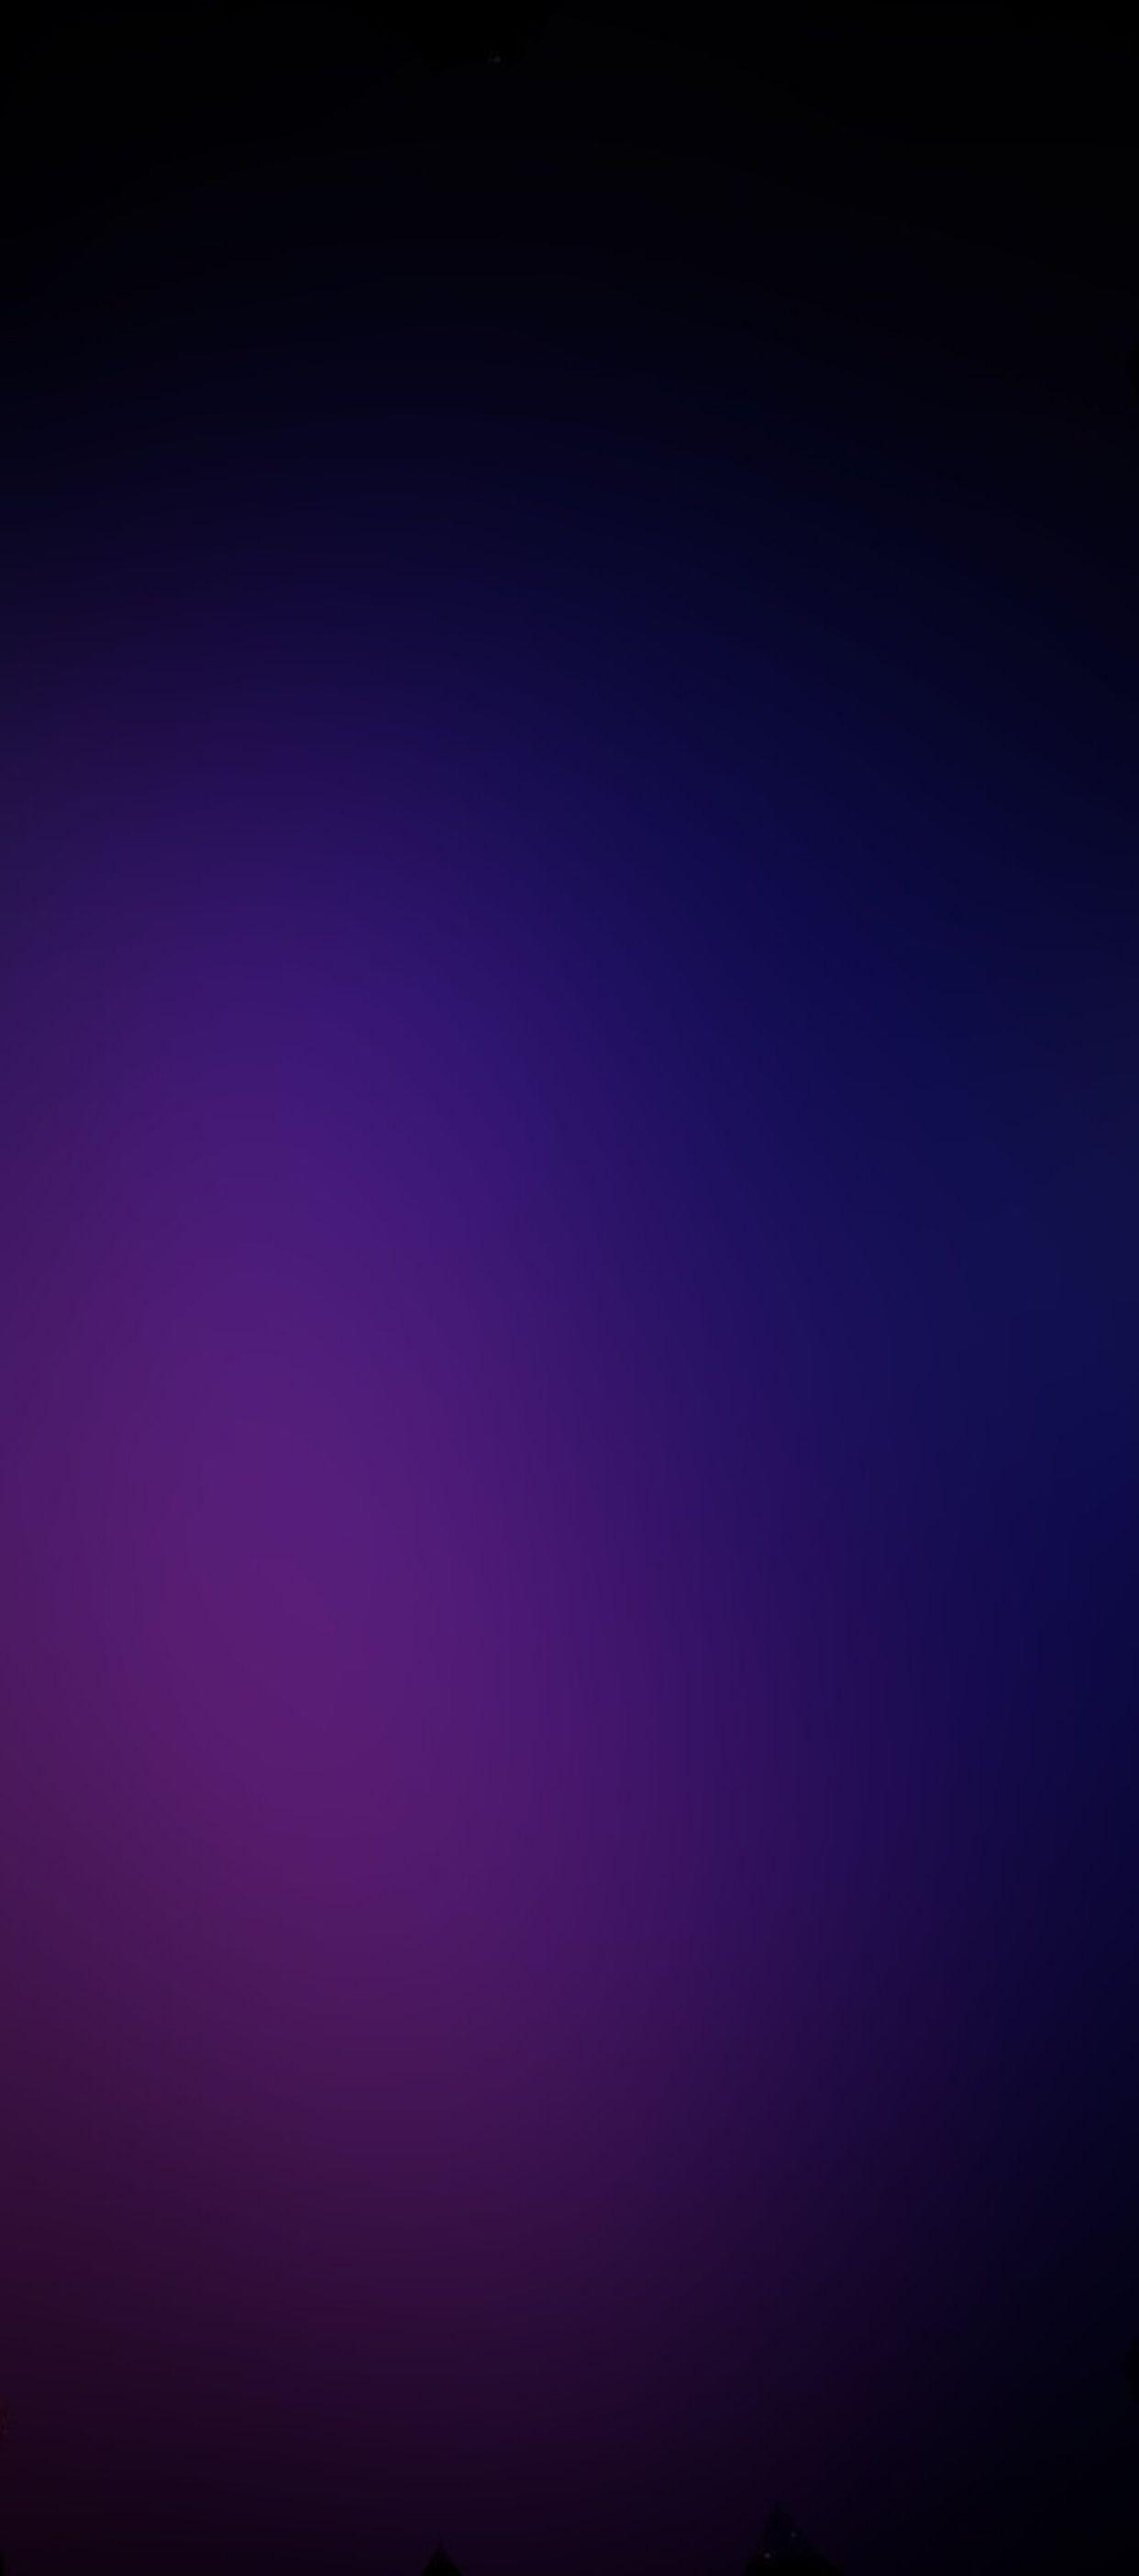 Purple Galaxy S8 Wallpapers - Top Free